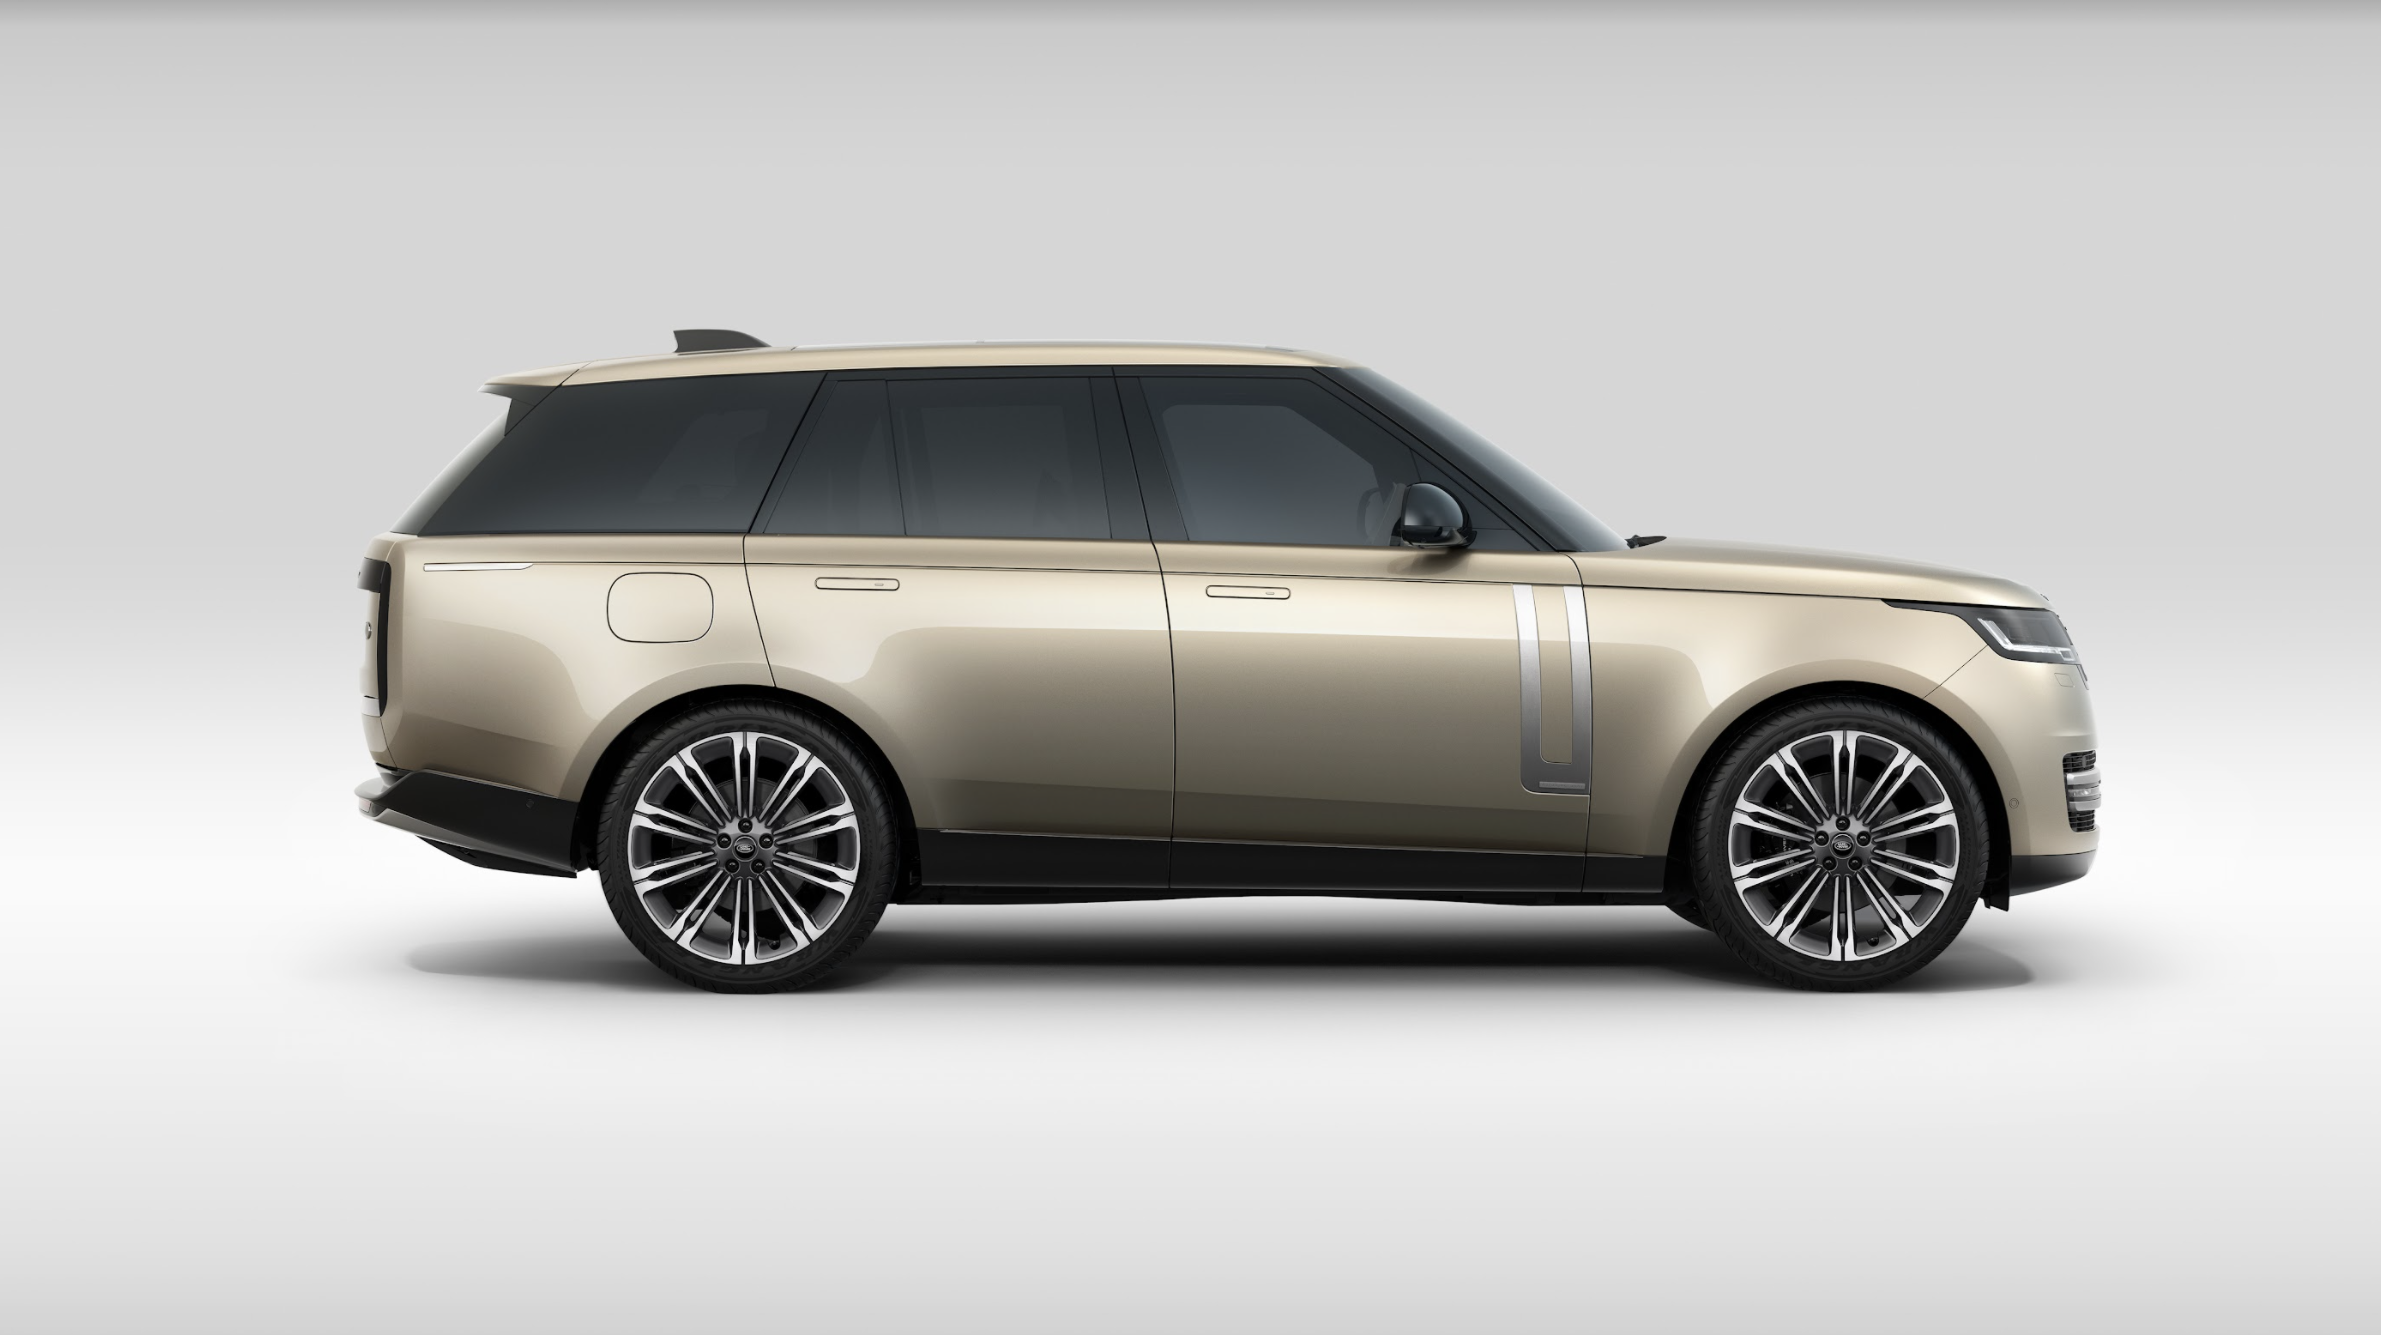  The New Range Rover mixes modernity and aesthetic grace with technological sophistication and seamless connectivity.